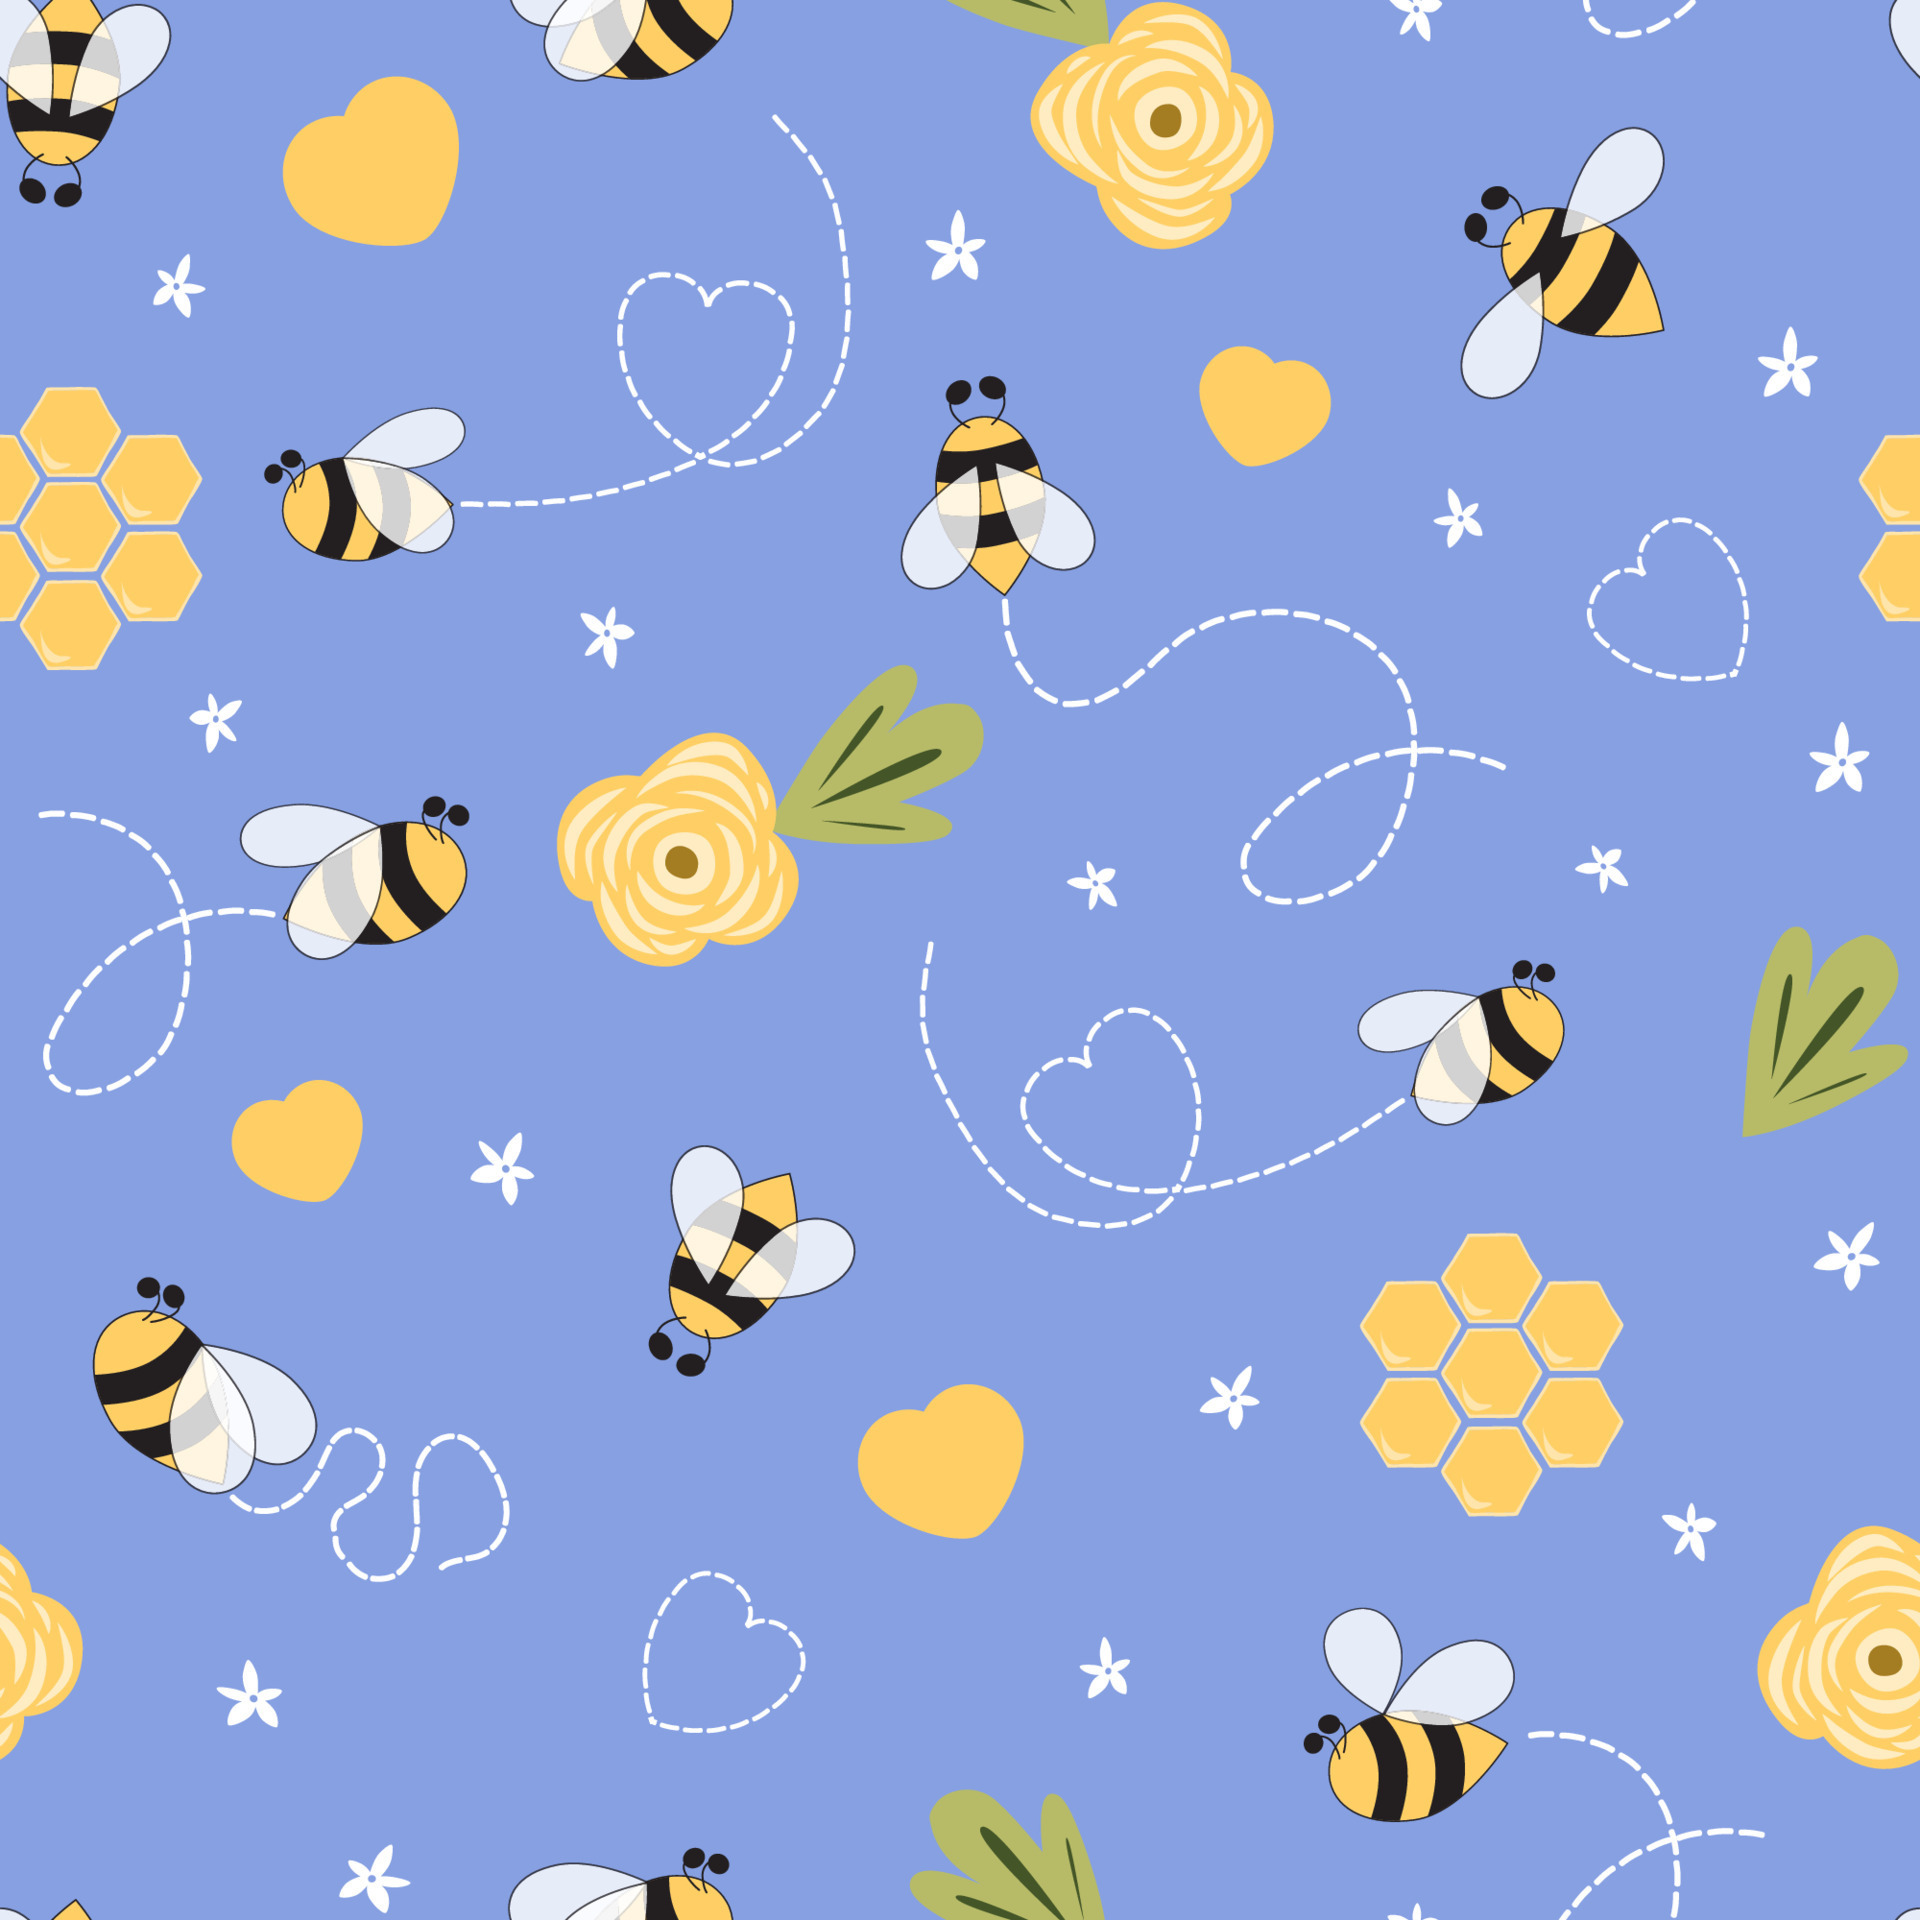 Farrow and Ball Bumble Bee Wallpaper - Approved F&B London Retailer